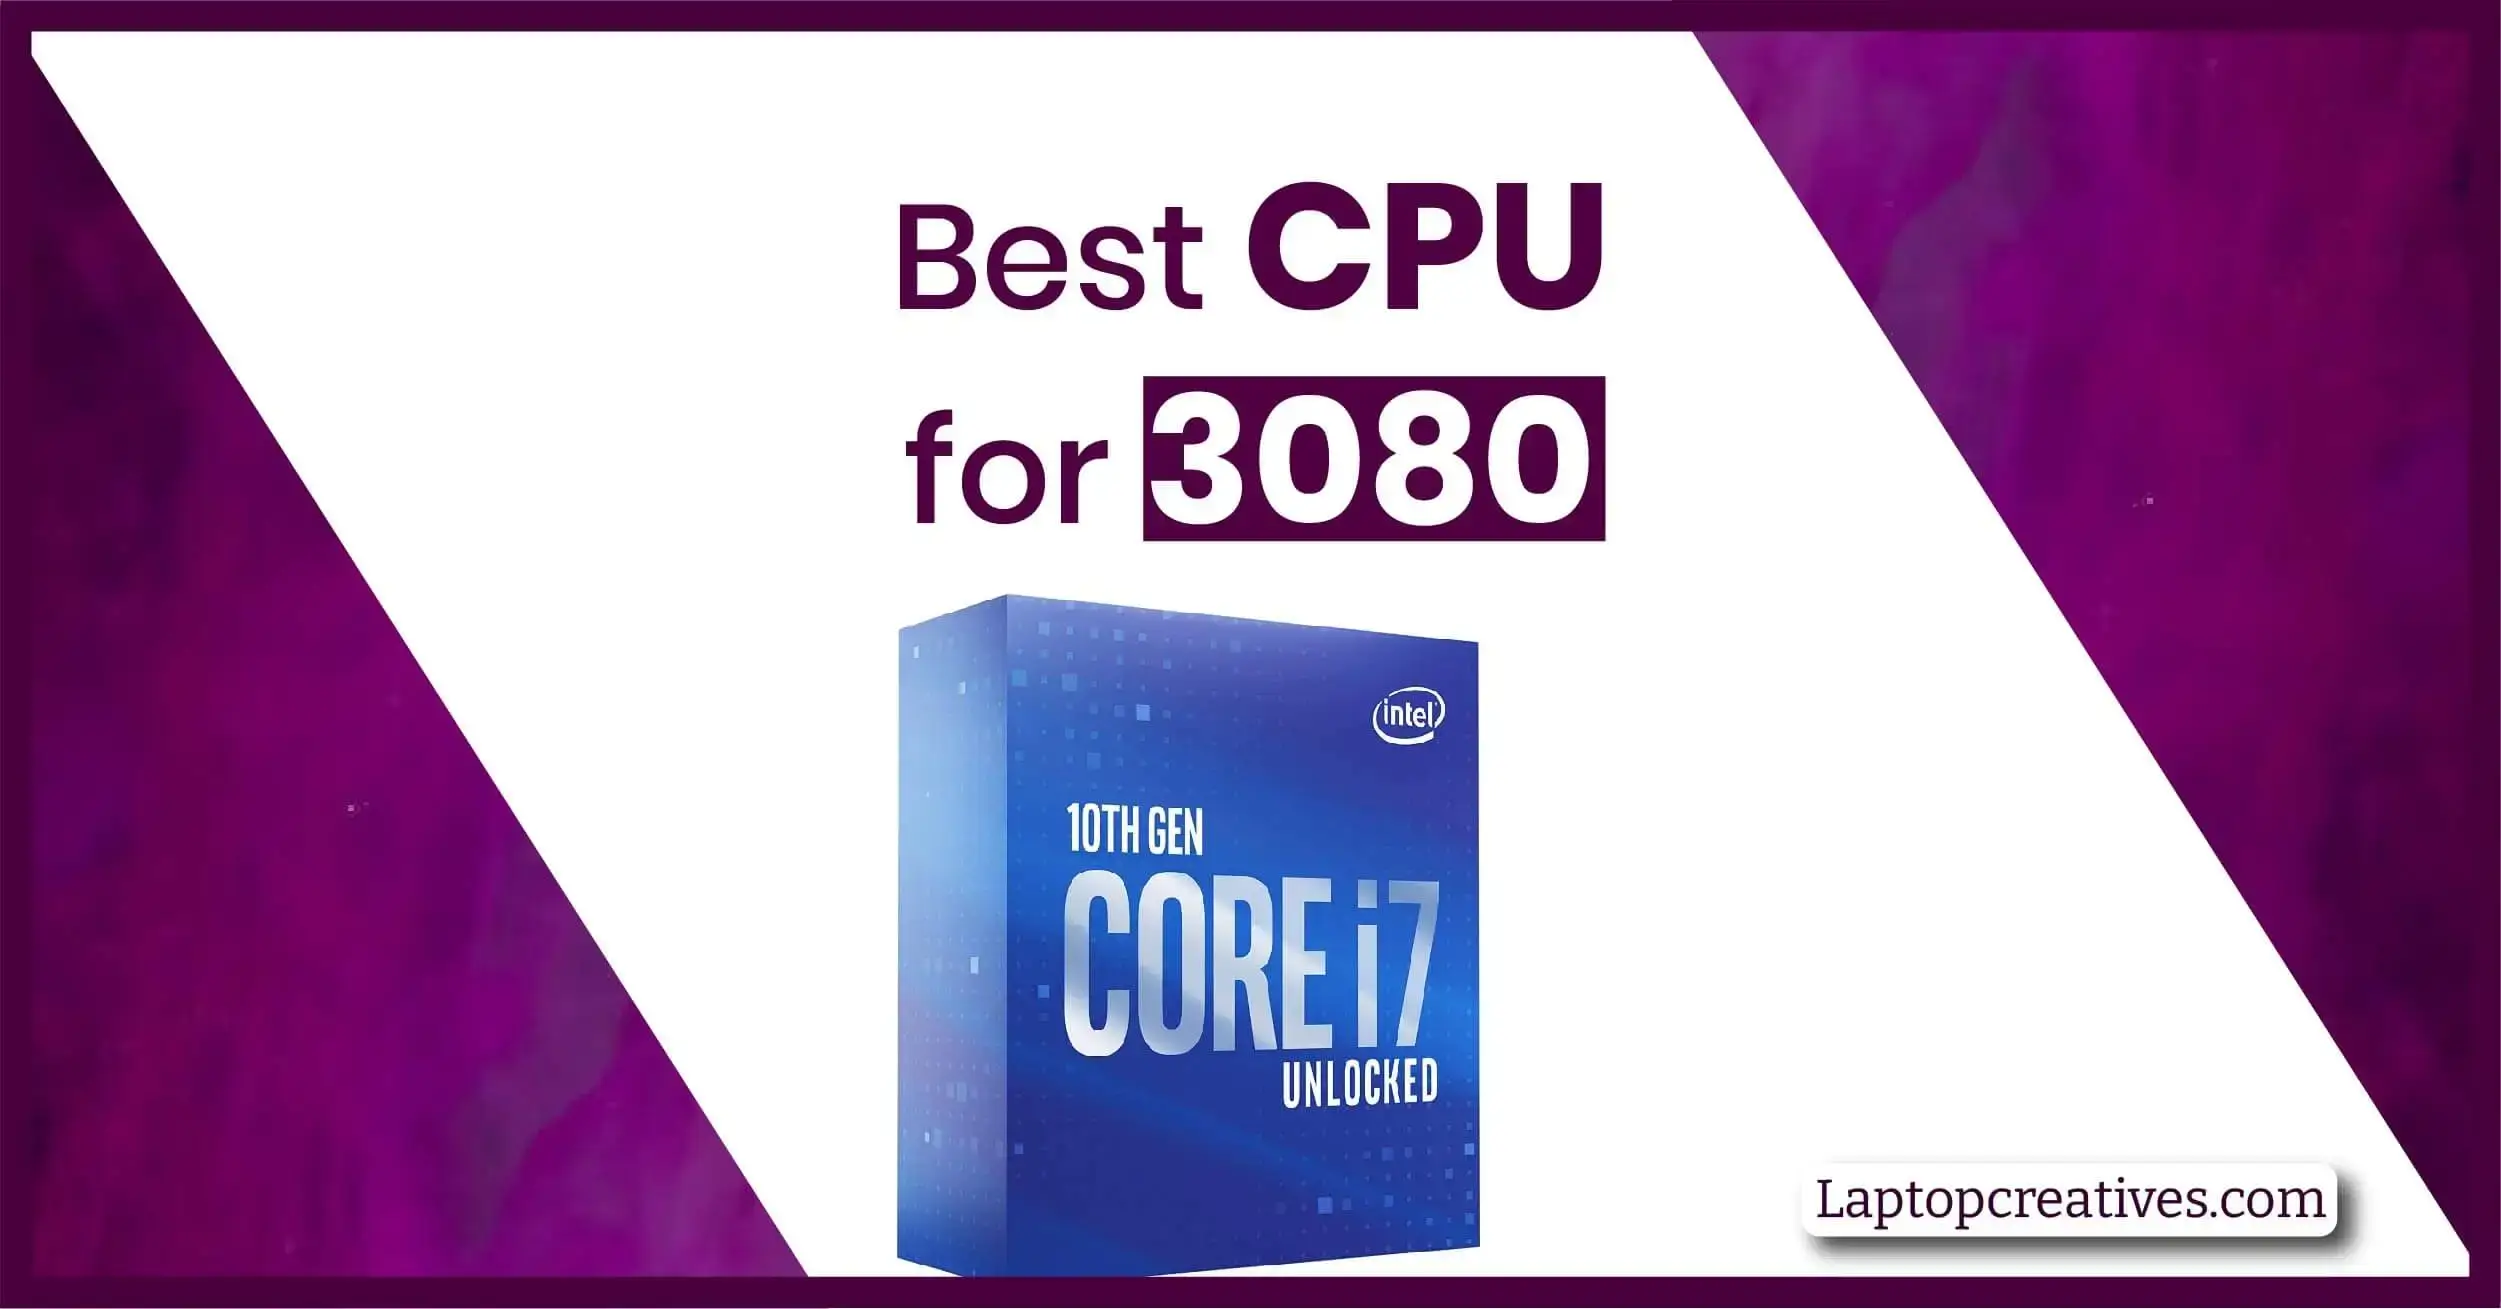 Best CPU for 3080